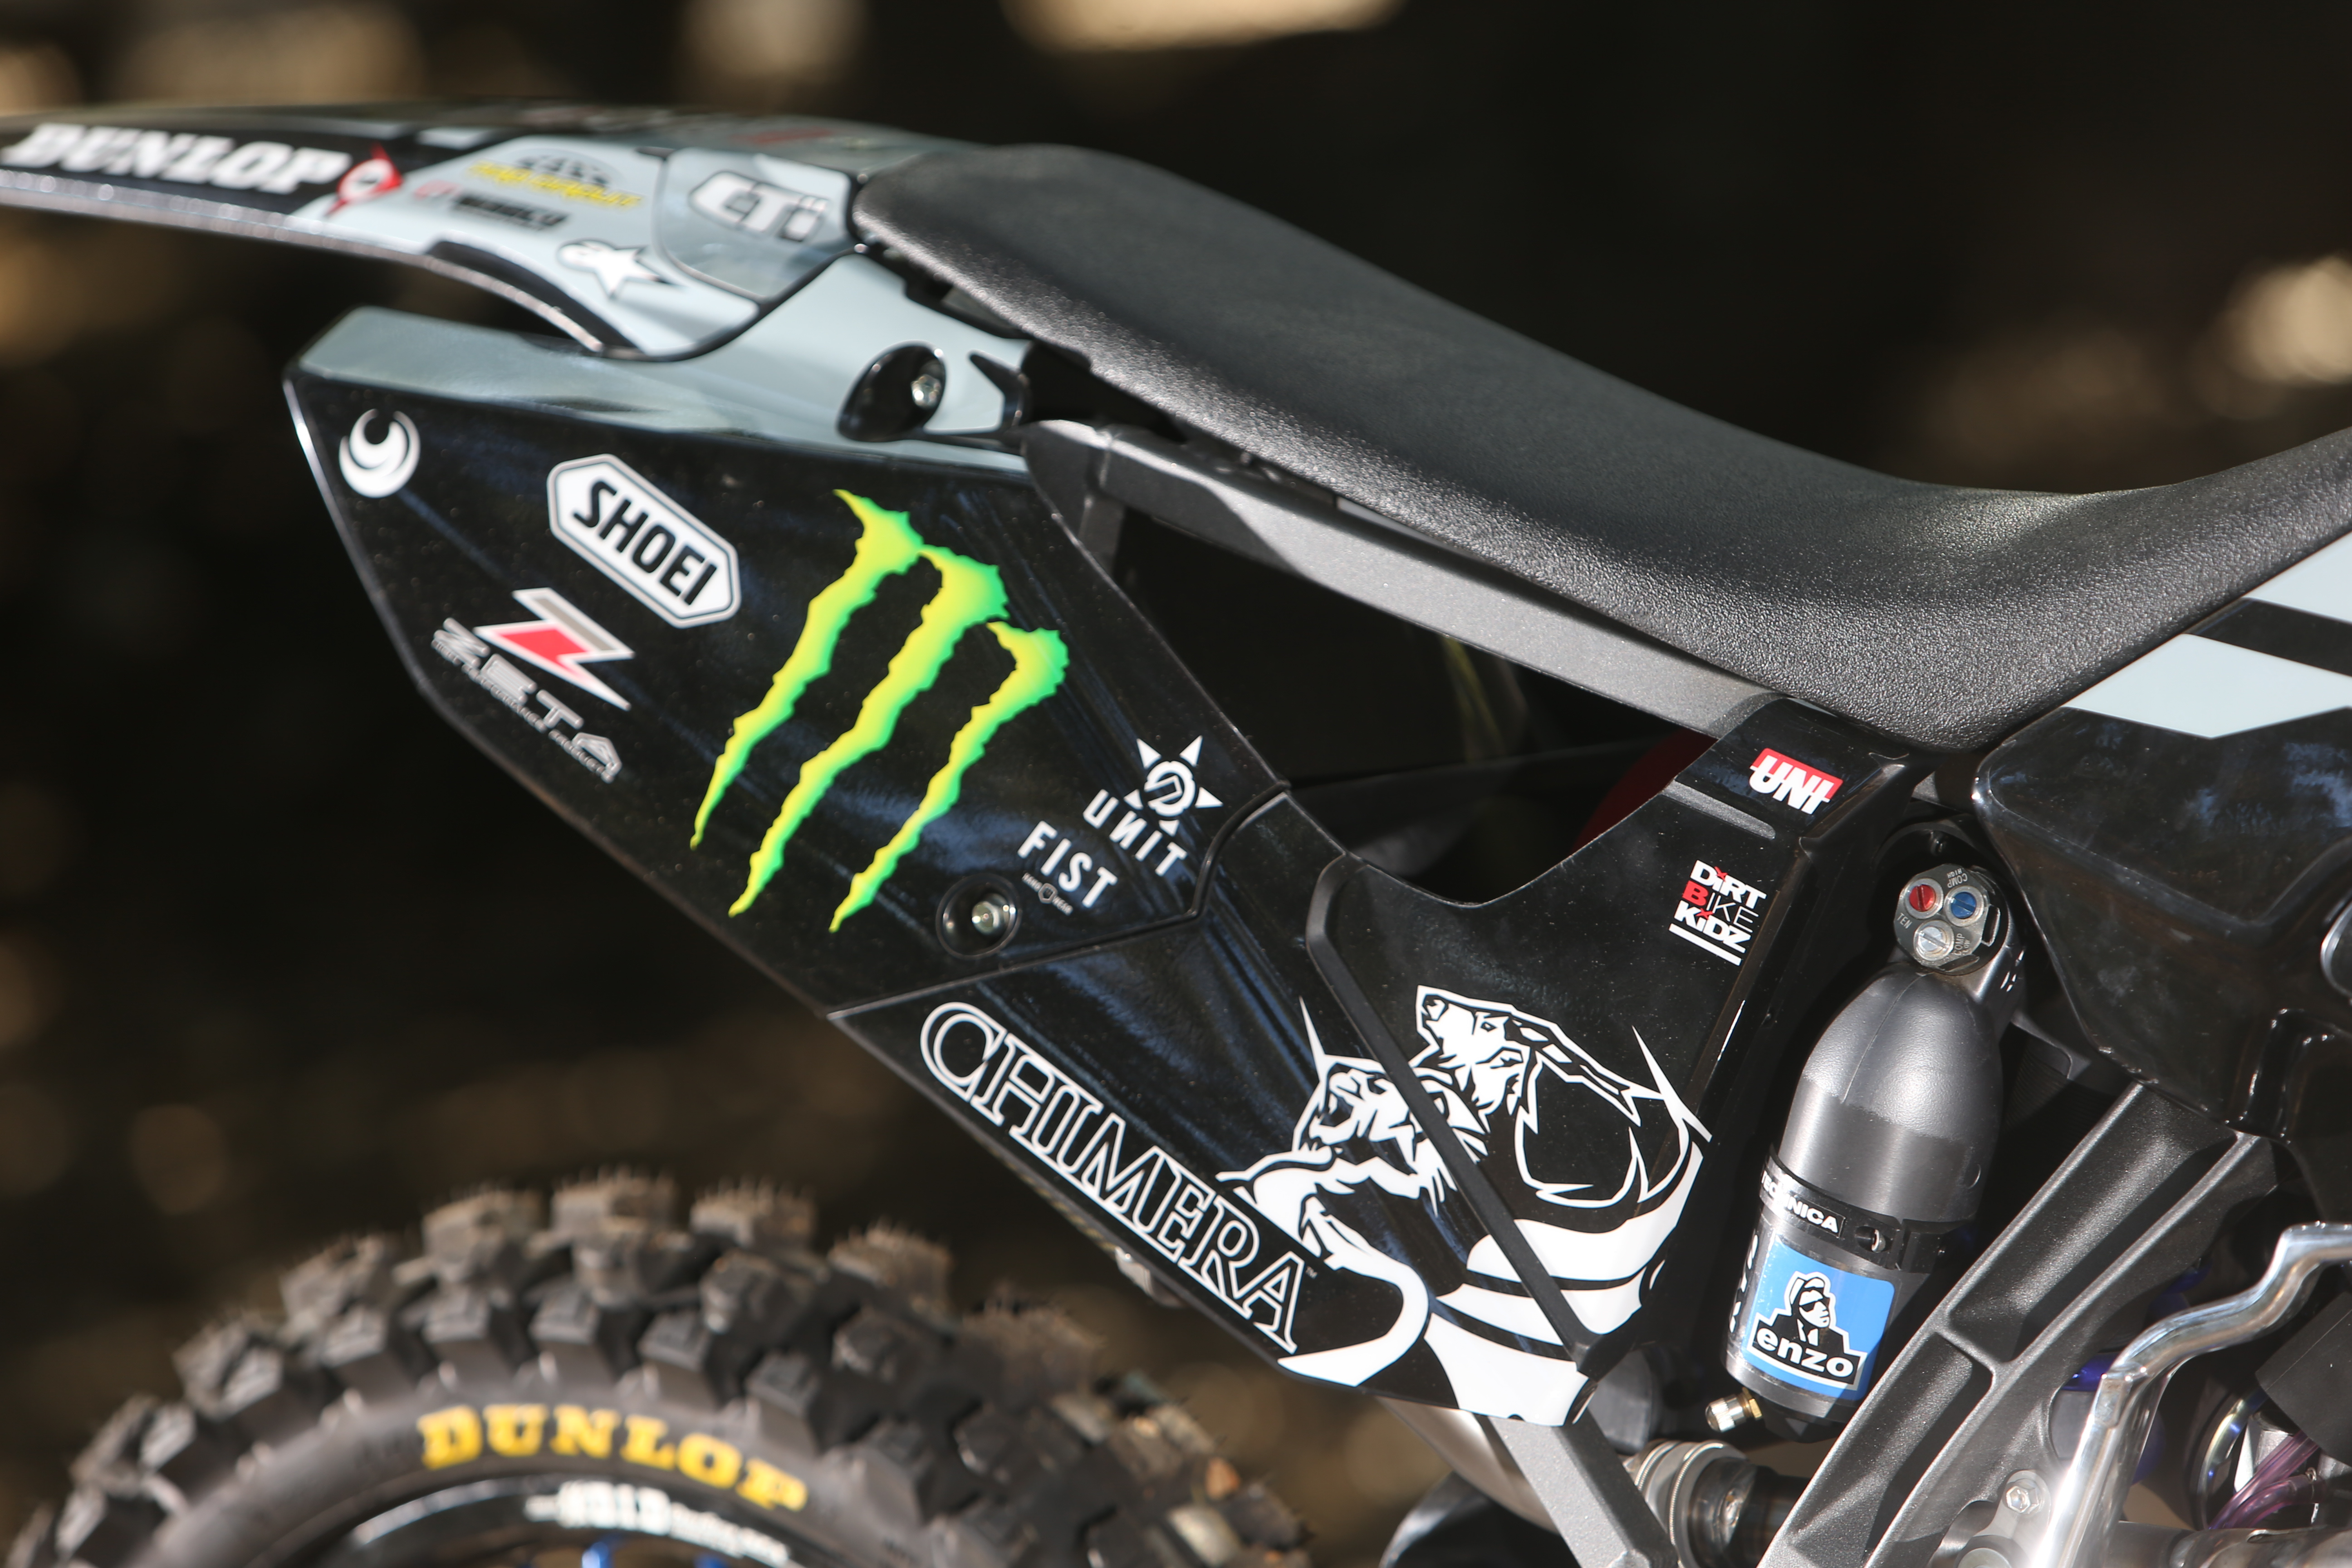 What makes an FMX bike special?